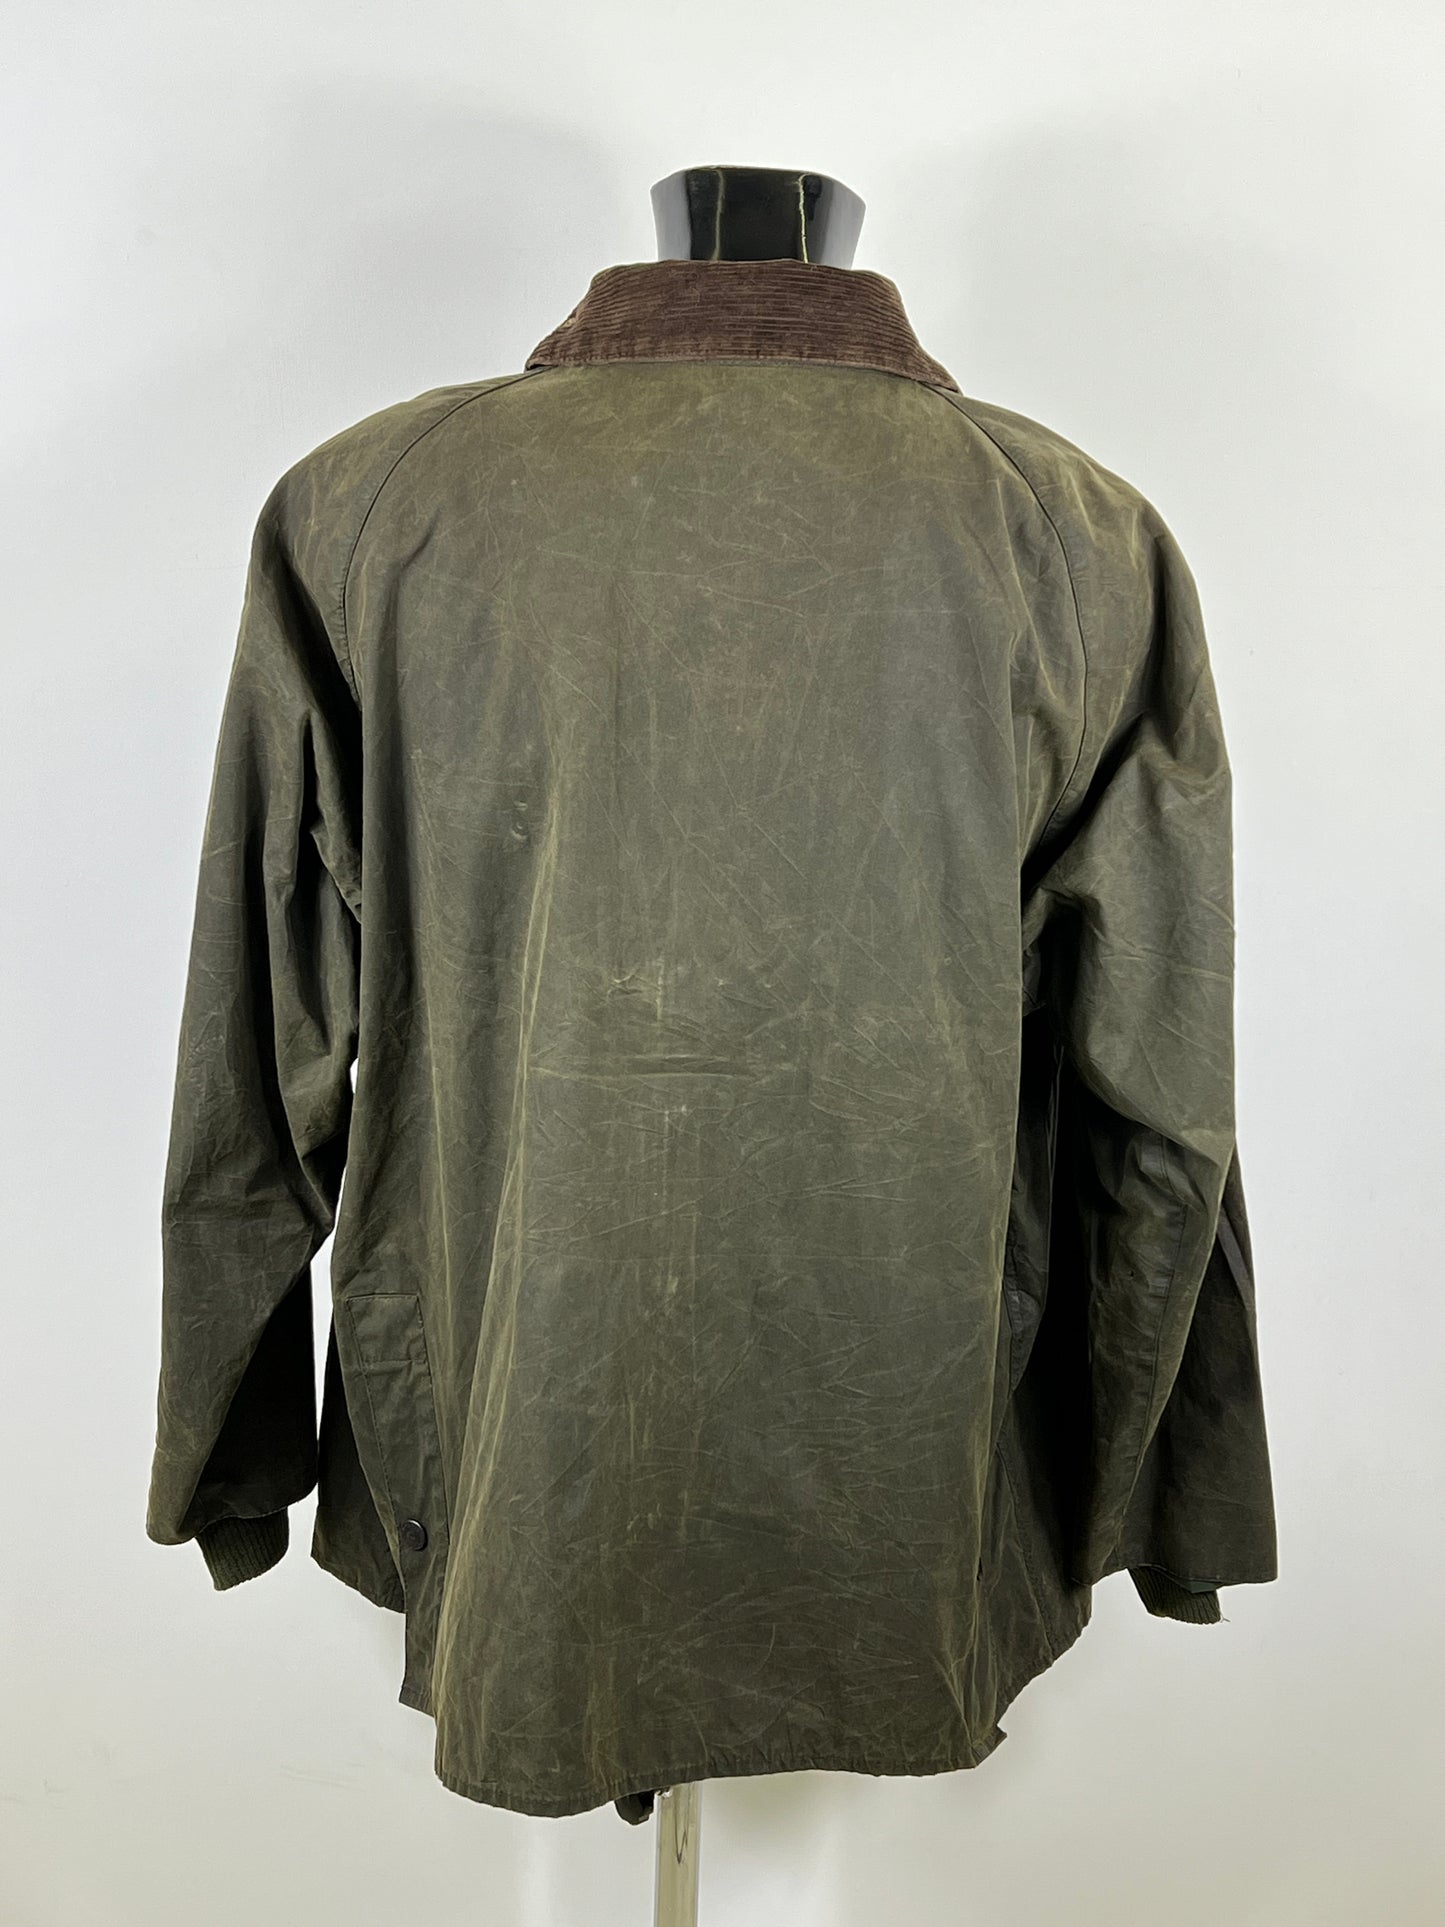 Barbour Giacca Bedale Uomo Verde Vintage C50/127 CM XXL Green Waxed Bedale Jacket